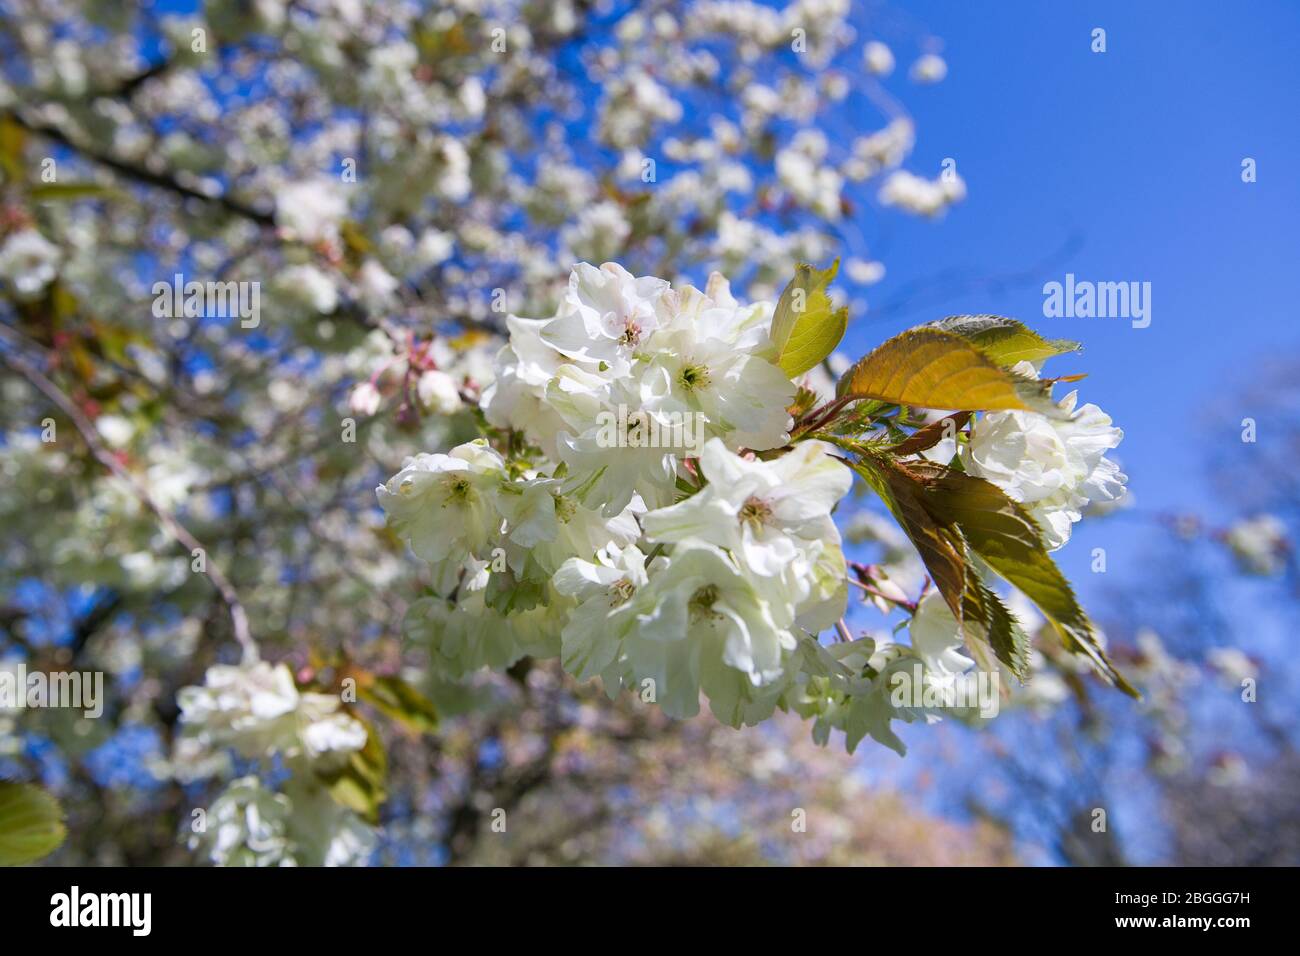 Glasgow, UK. 21st Apr, 2020. Pictured: Bright pure white cherry blossom fills the park. Scenes from Kelvingrove Park in Glasgow during the coronavirus (COVID-19) lockdown. Credit: Colin Fisher/Alamy Live News Stock Photo